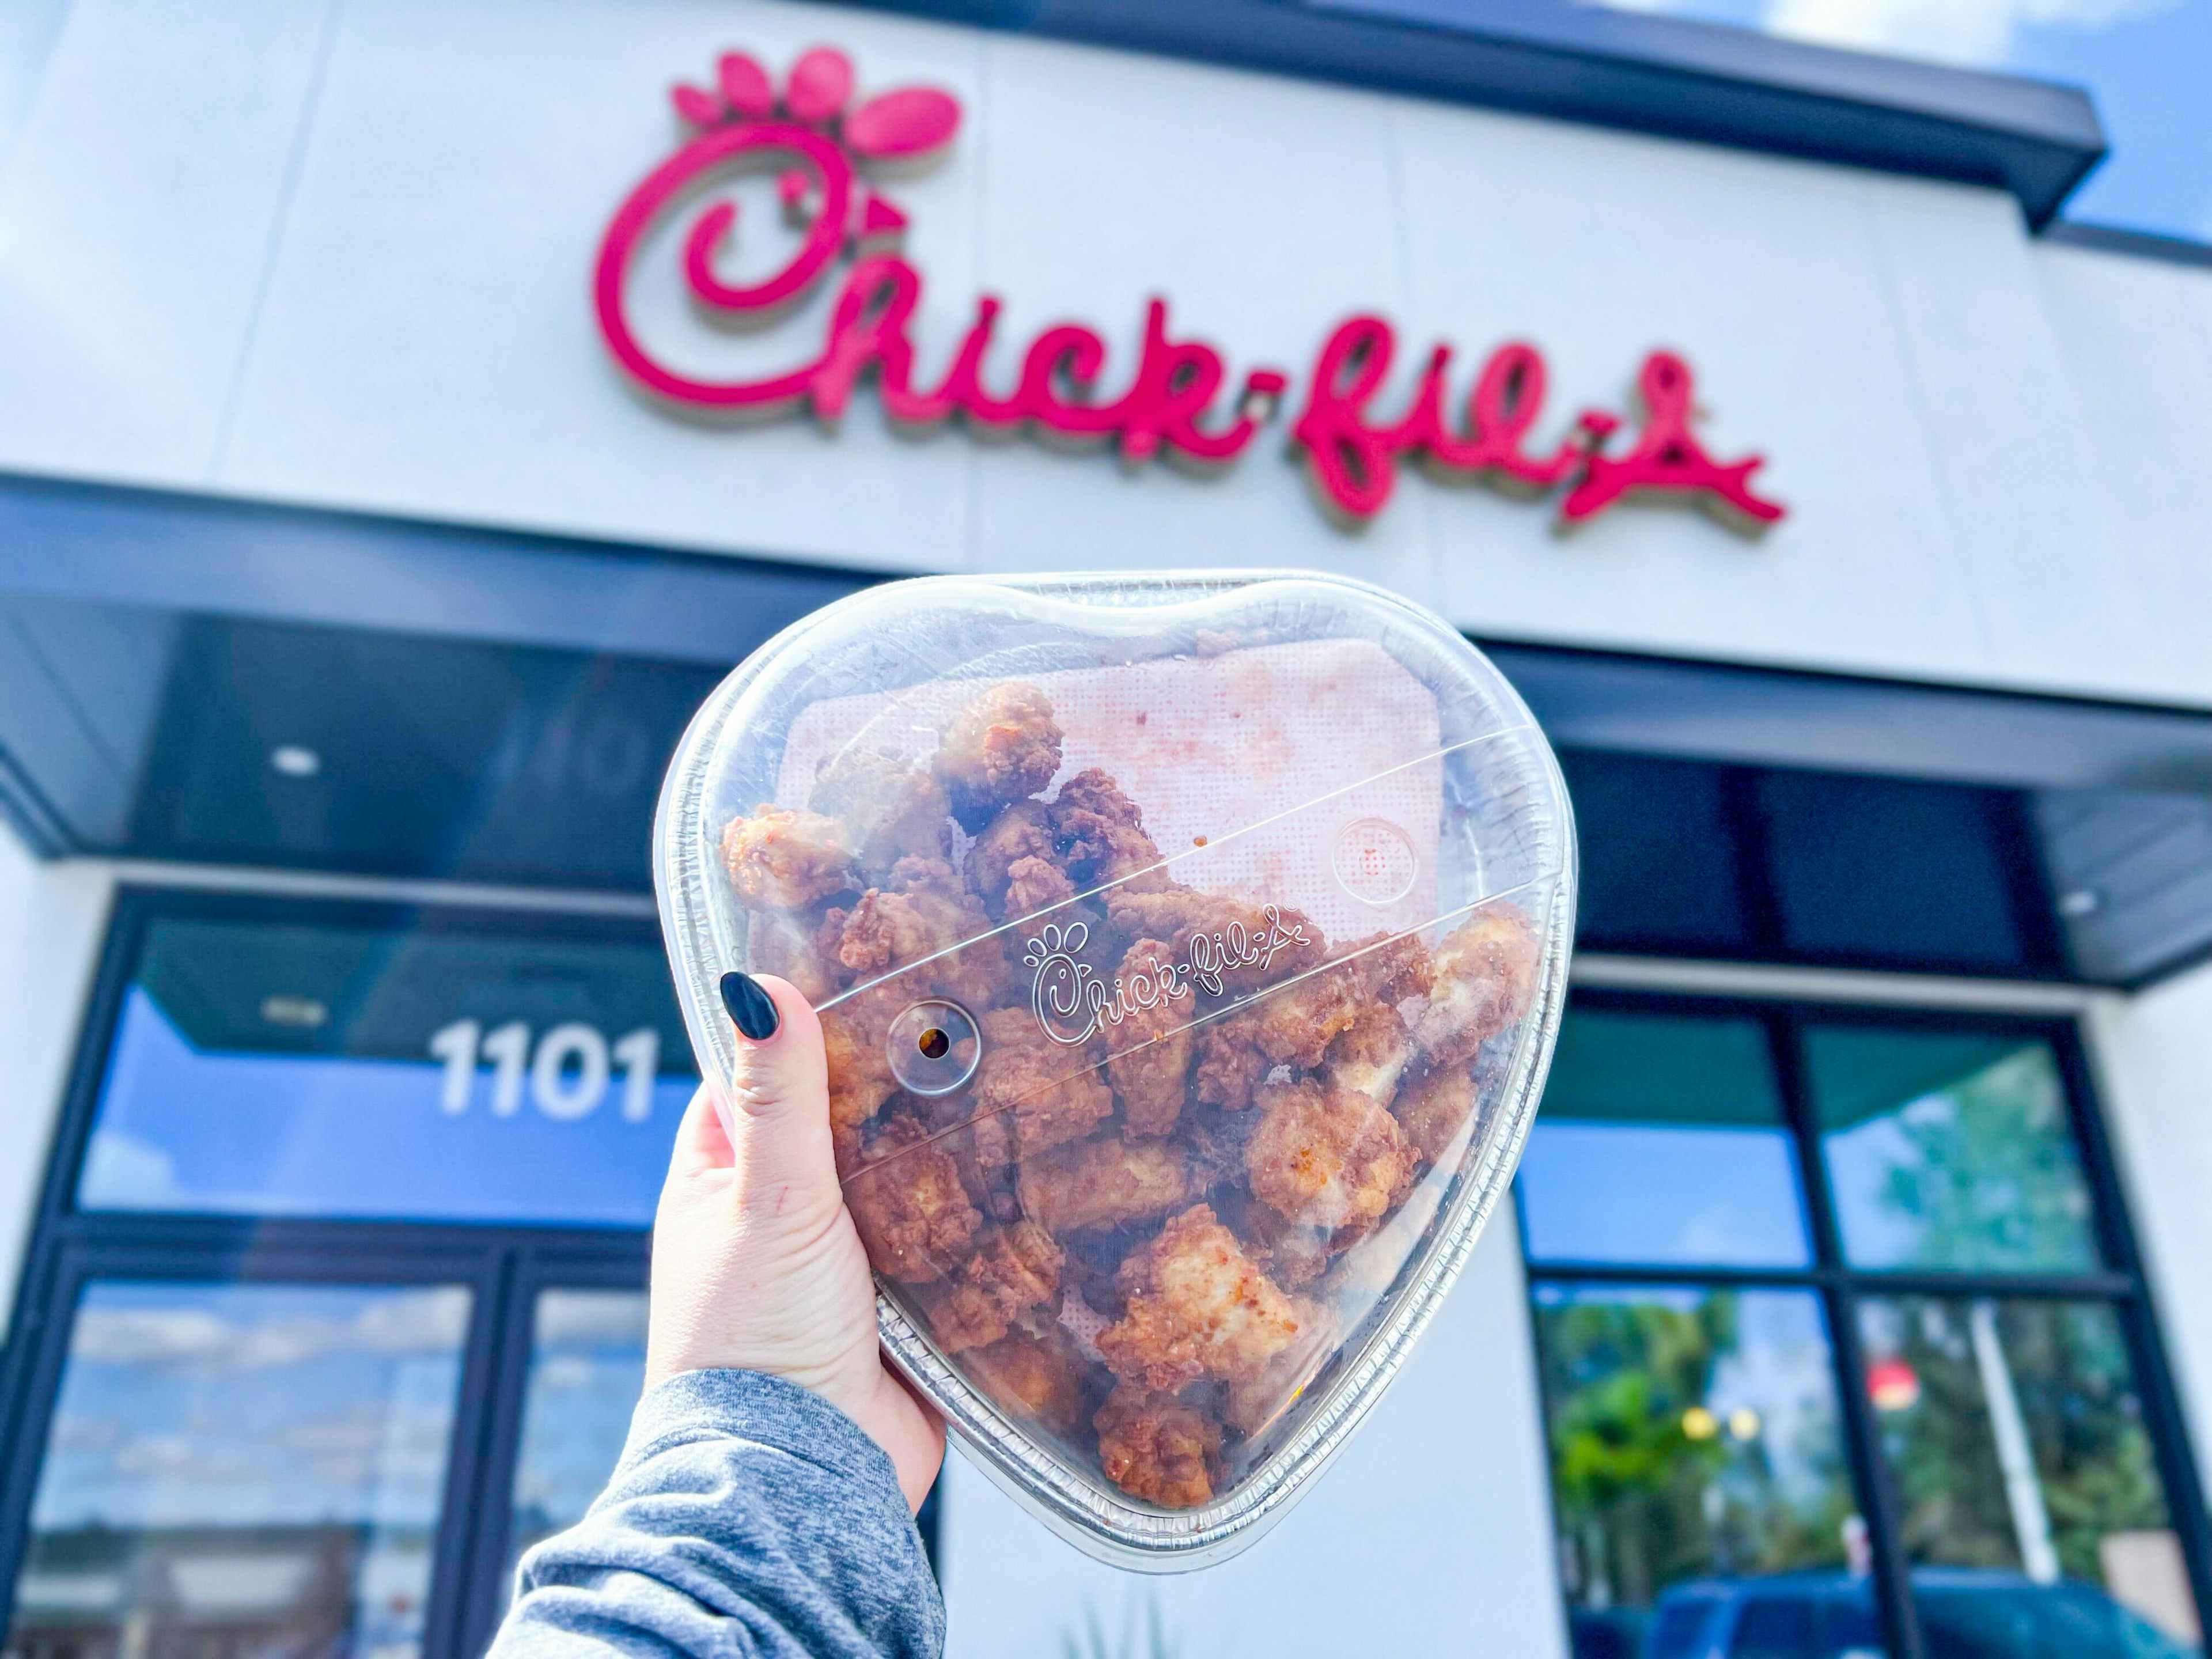 chick-fil-a-valentines-day-heart-tray-chicken-nuggets-kcl-05